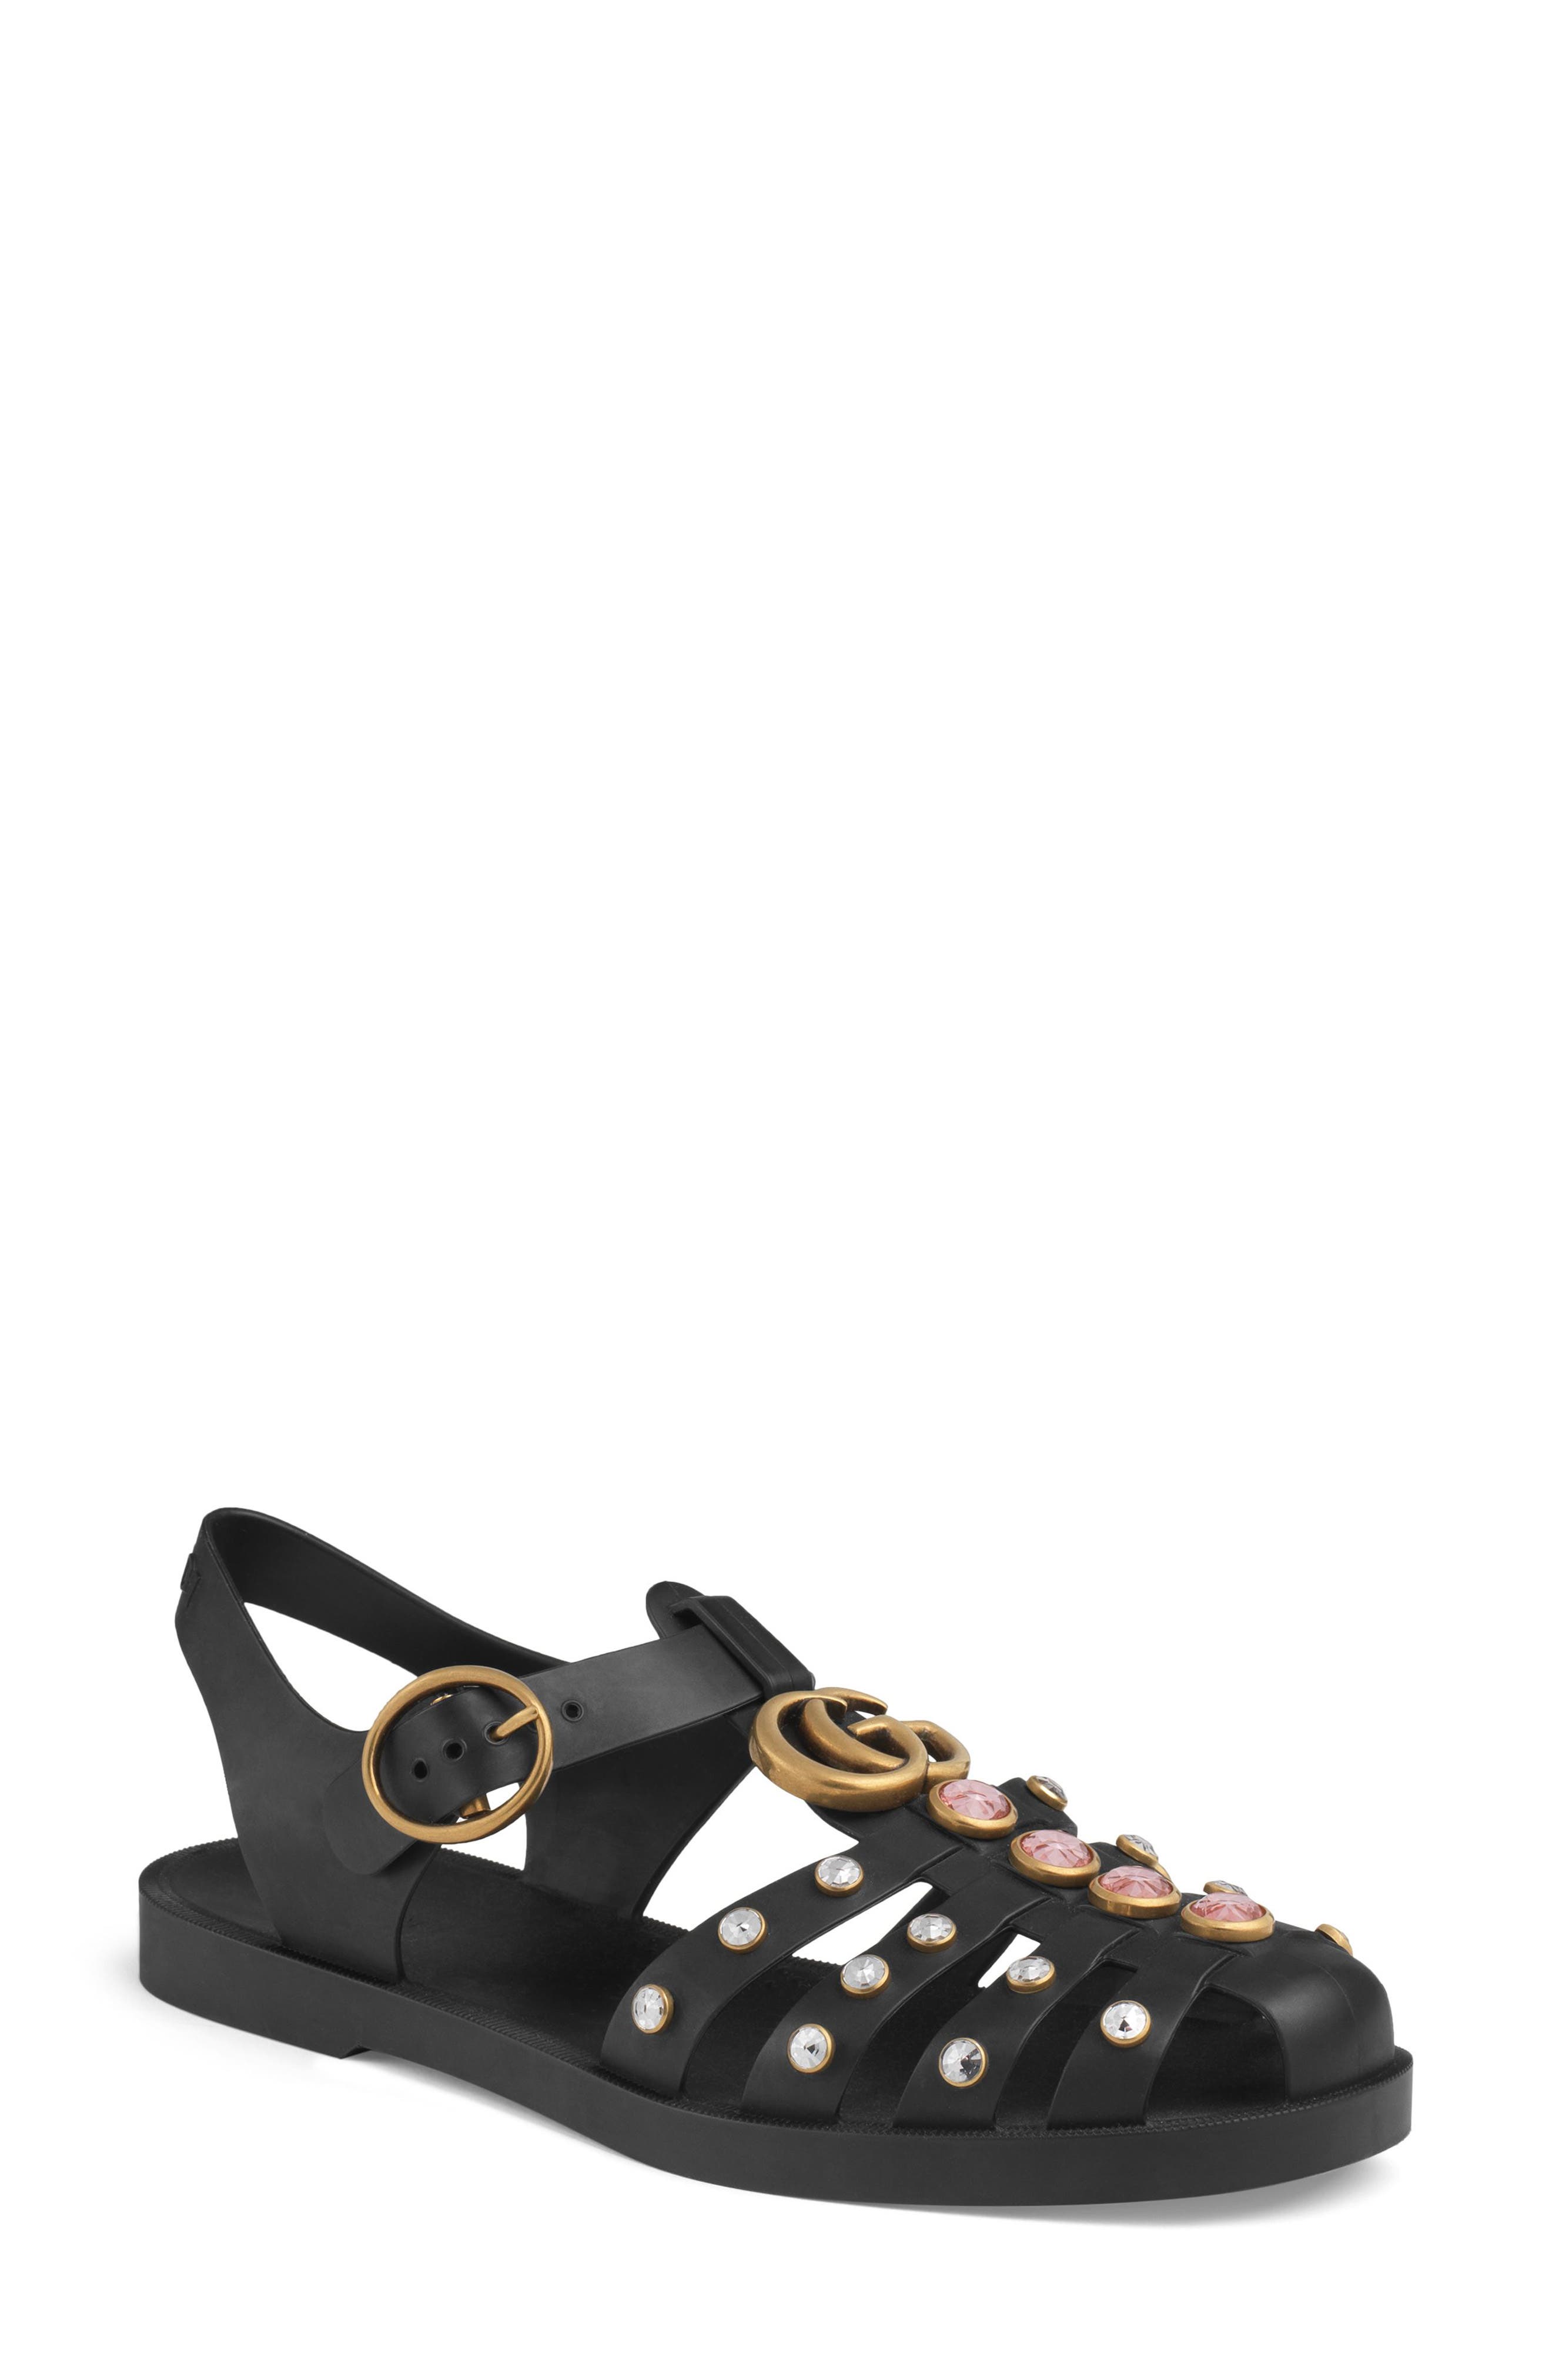 gucci sandals with diamonds